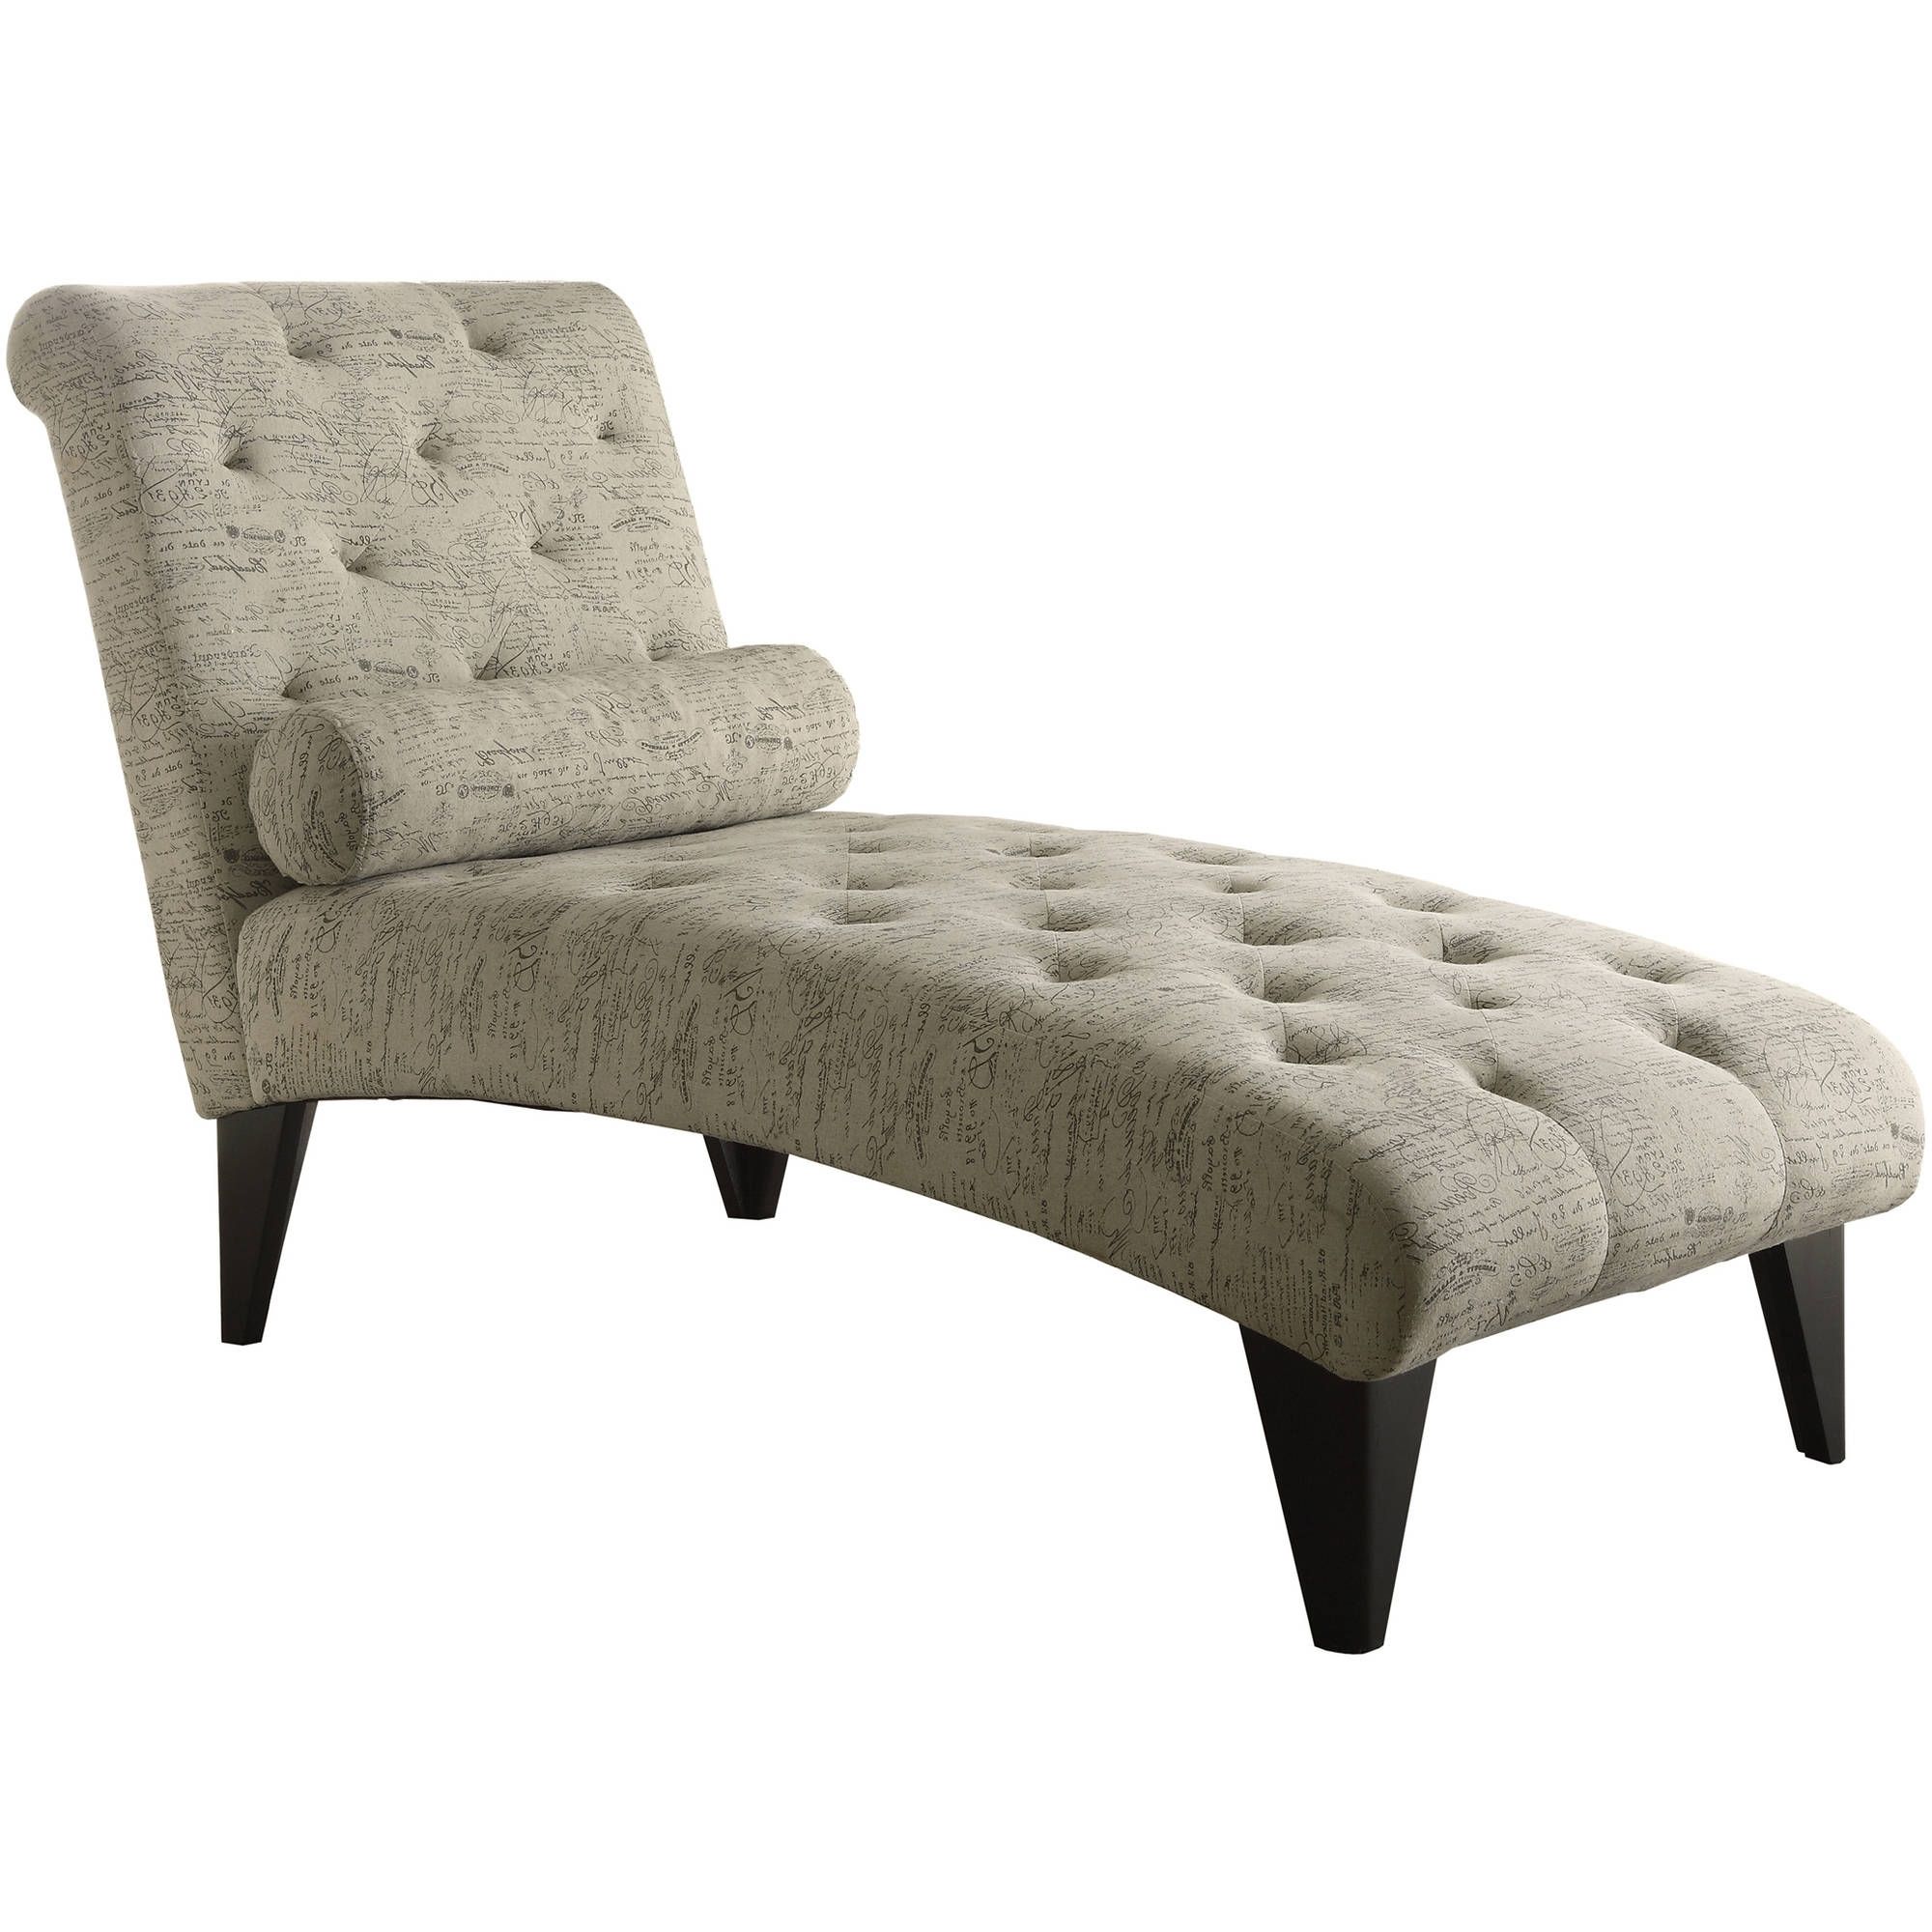 Fashionable Chaise Lounges – Walmart Pertaining To Grey Chaise Lounges (View 12 of 15)